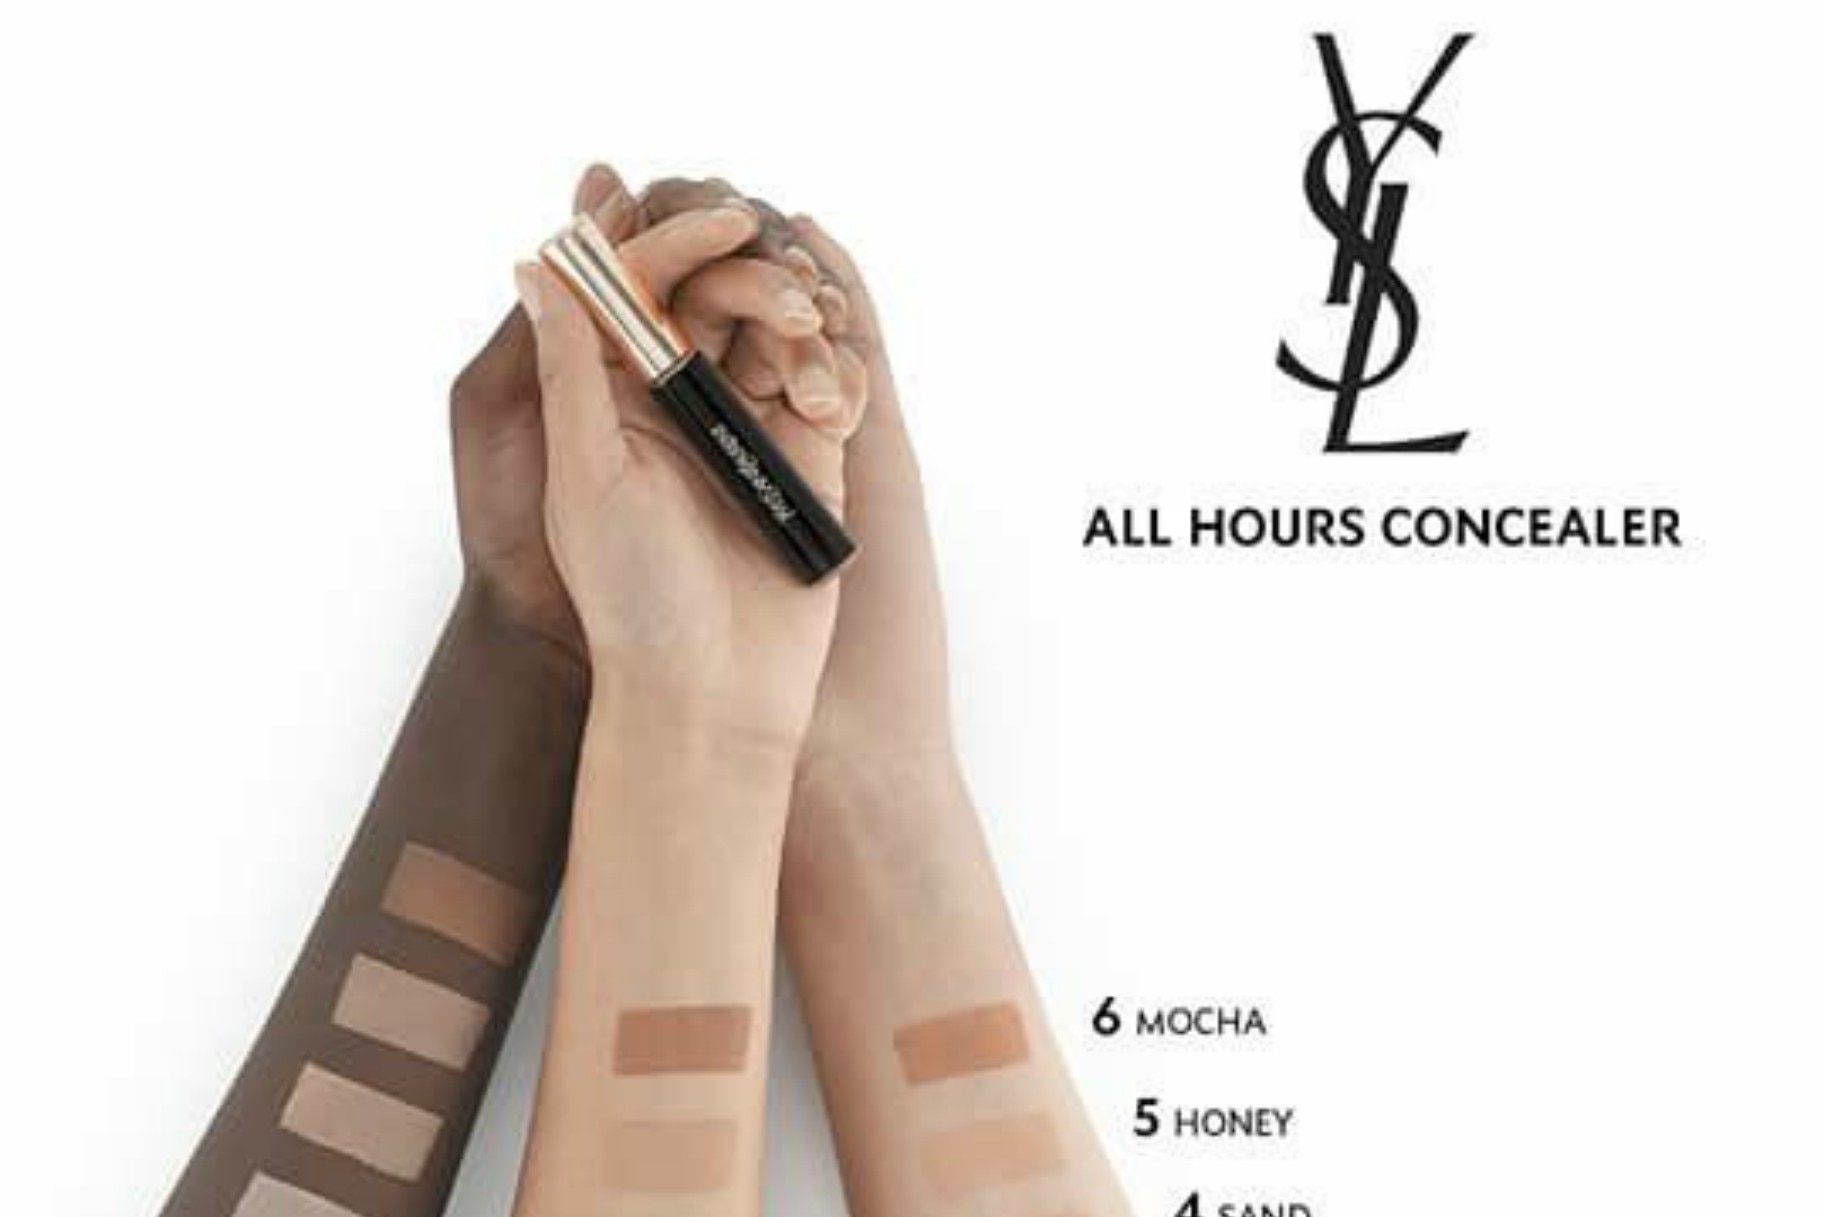 procent personificering udløb Here's Why Beauty Fans Are Slamming YSL's Concealers | Very Real